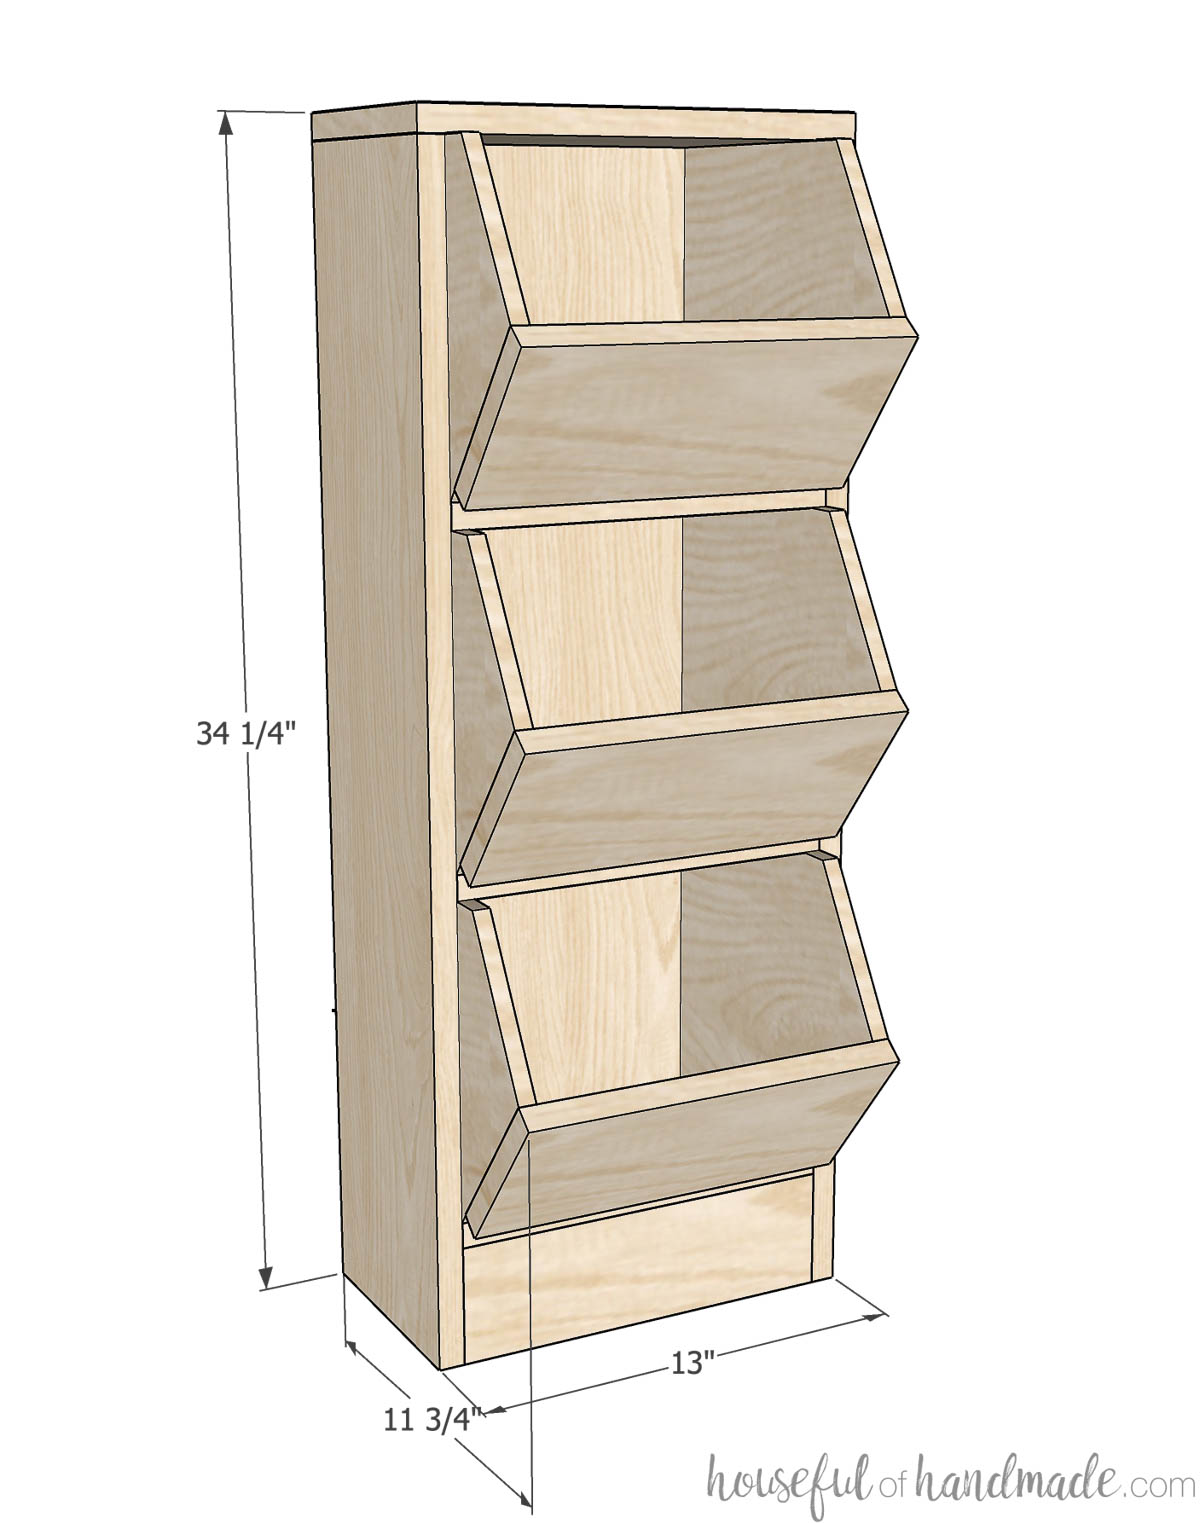 Sketch of single stack of vegetable storage bins with dimensions. 